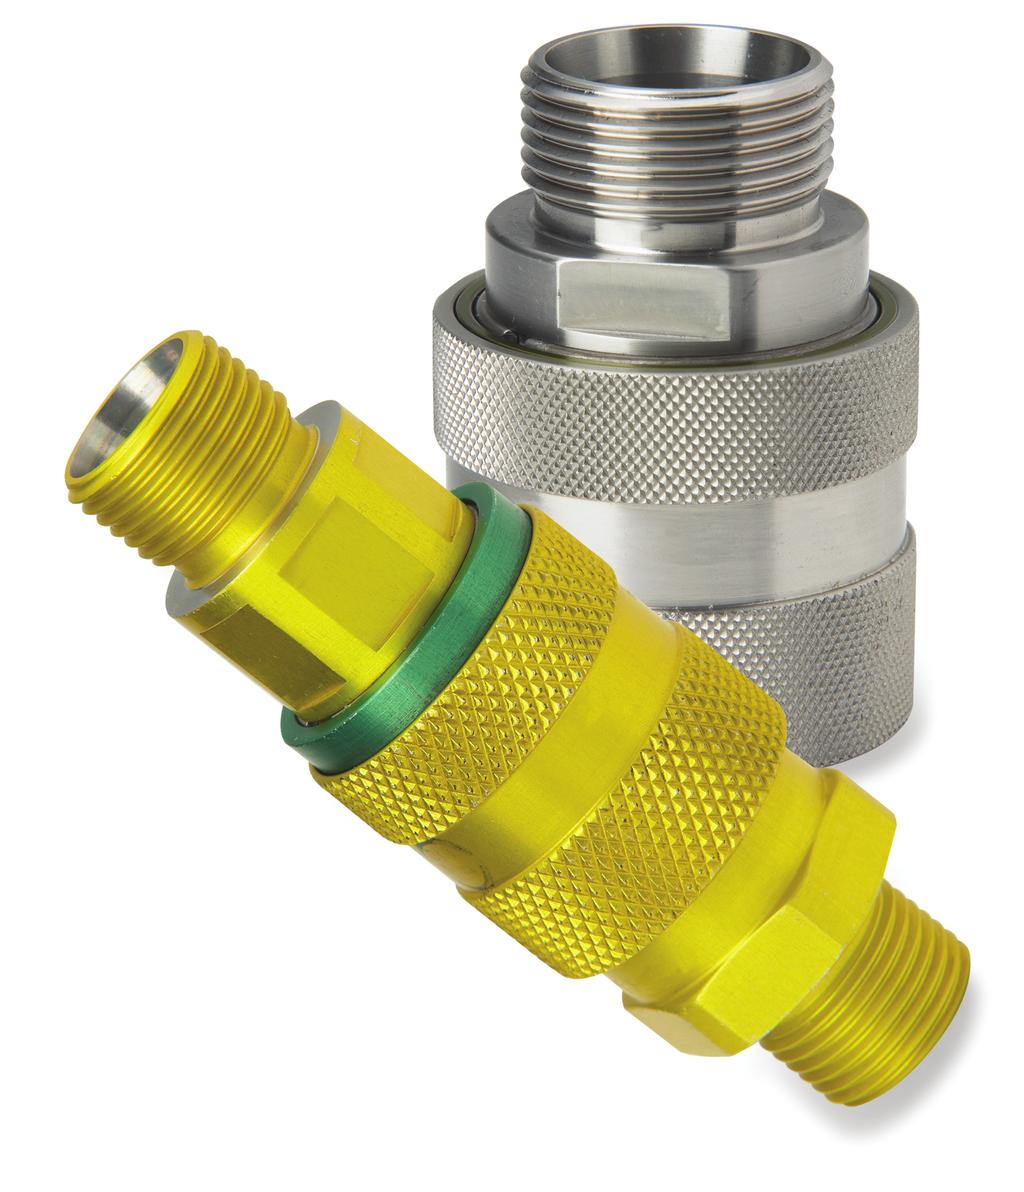 f Aeroquip Series 1965 & 2055 Low Profile Push-Pull Quick Disconnect Couplings Speeds